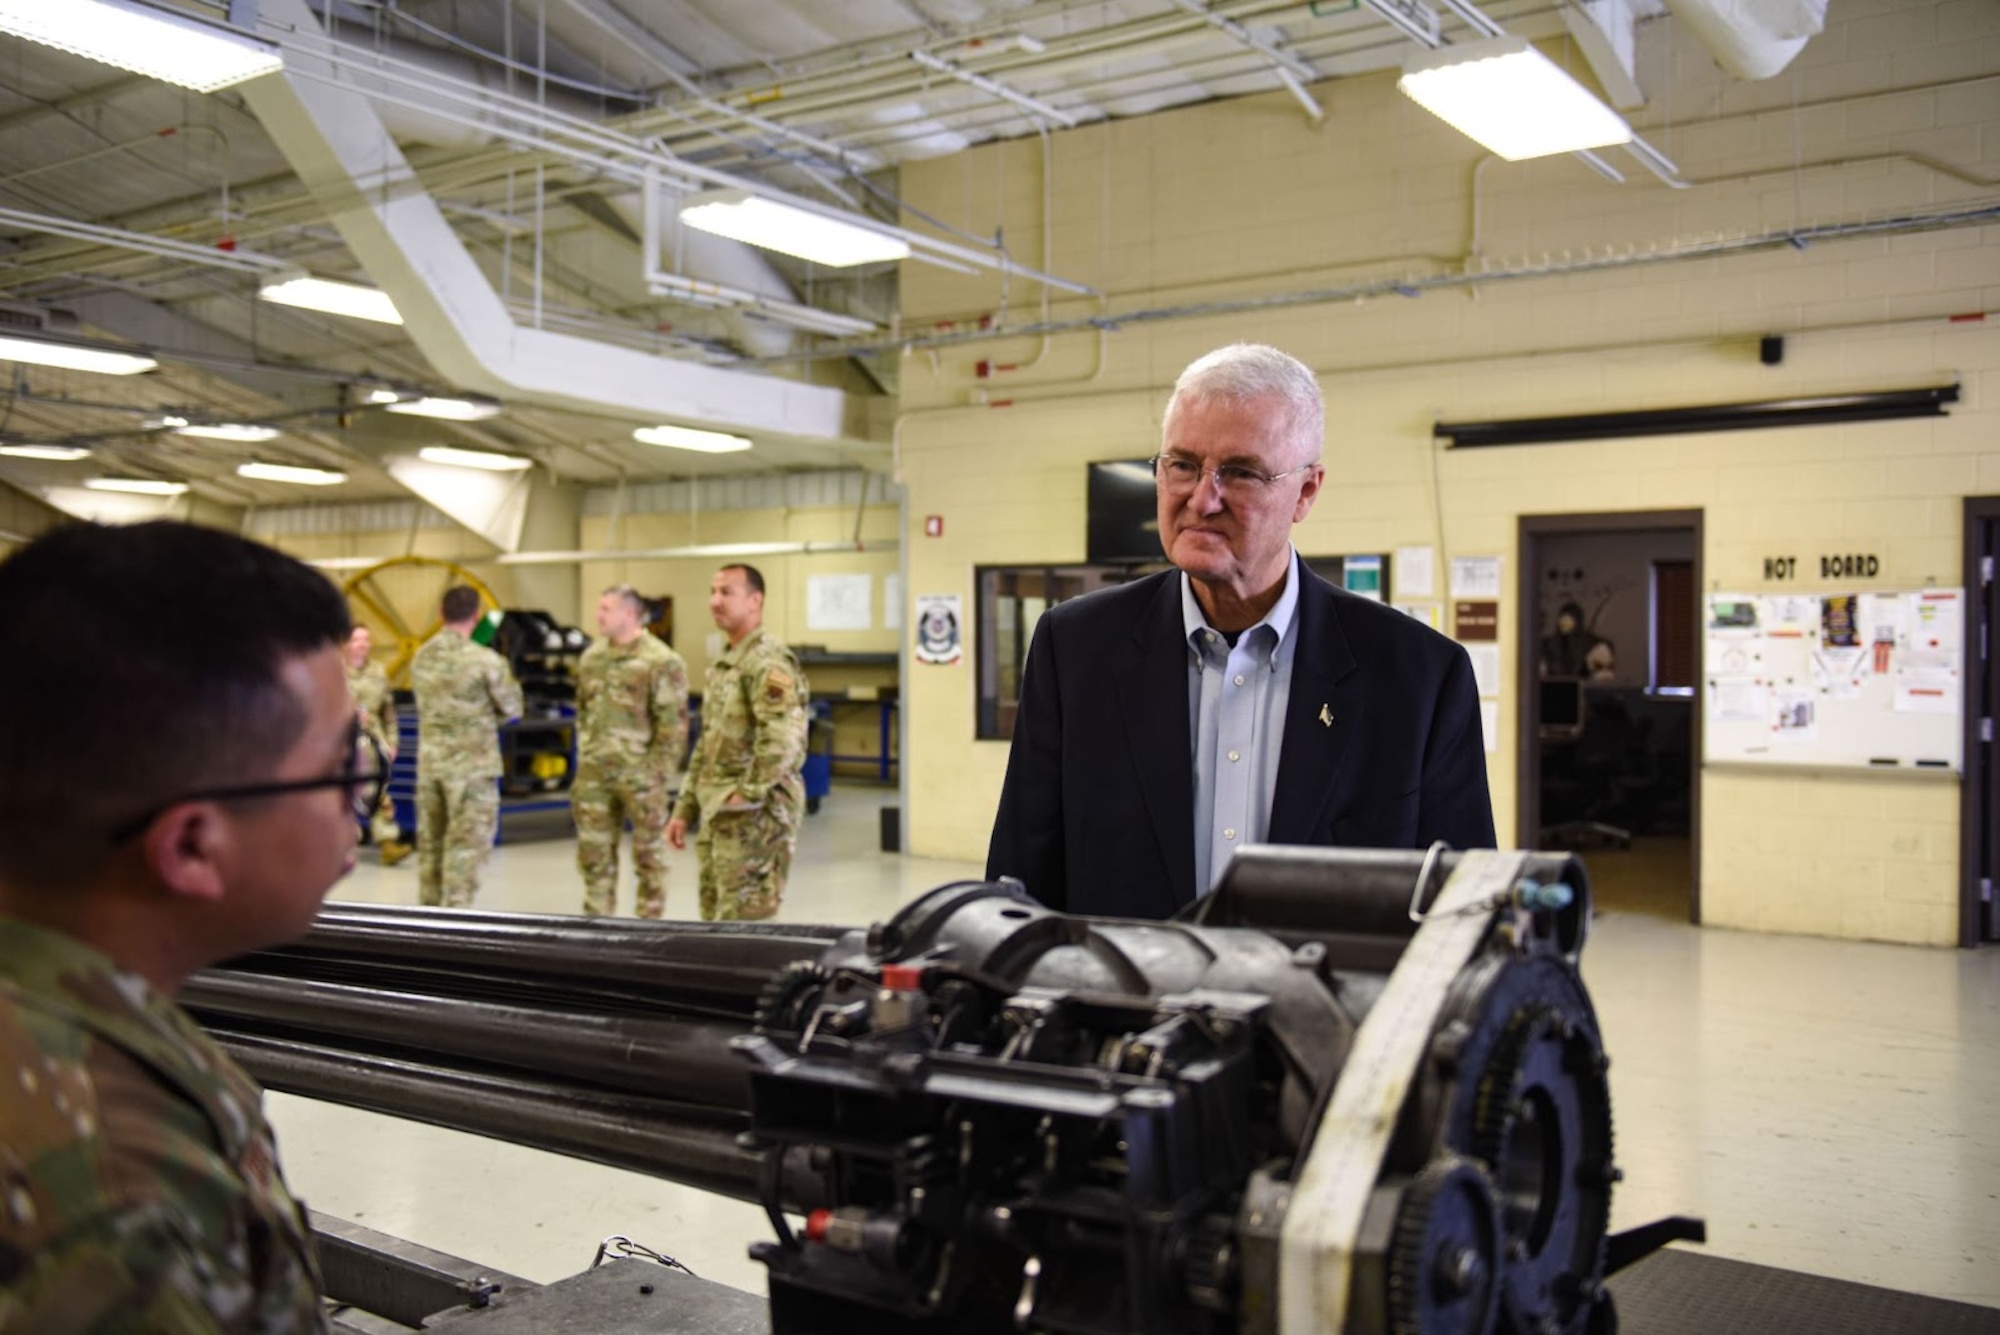 Chief Master Sgt. of the Air Force (ret.) Gerald R. Murray is shown a GAU-8/A Avenger Gatling gun at the 74th Maintenance Group weapons unit at Moody Air Force Base, Georgia, March 15, 2023. Gatling guns are the standard issue weapon attached to the A-10C Thunder ll and can fire around 3,900 rounds-a-minute. (U.S. Air Force photo by Airman 1st Class Sir Wyrick)